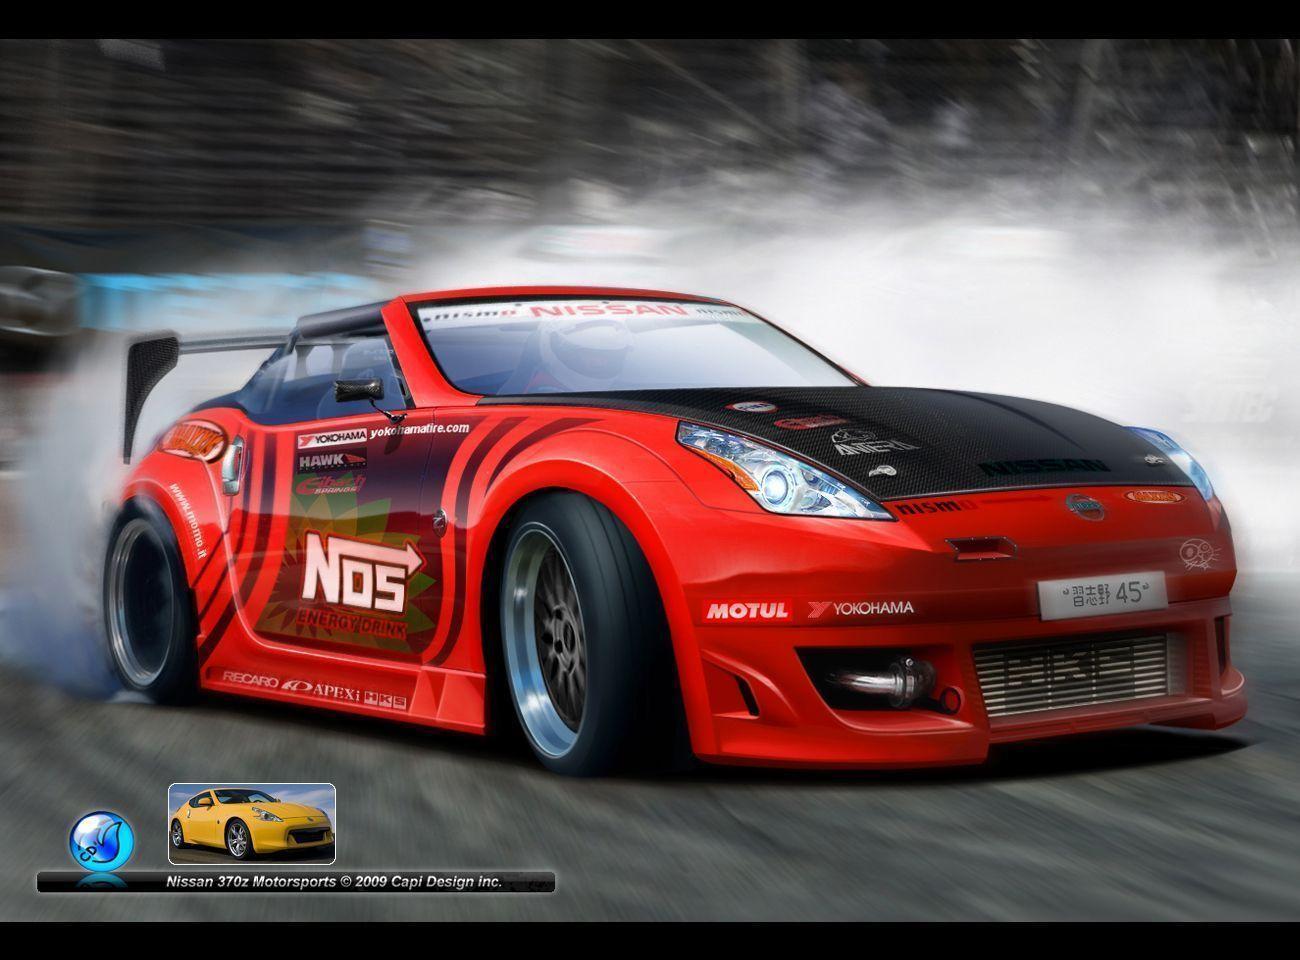 Nissan 370z wallpaper for iphone #3